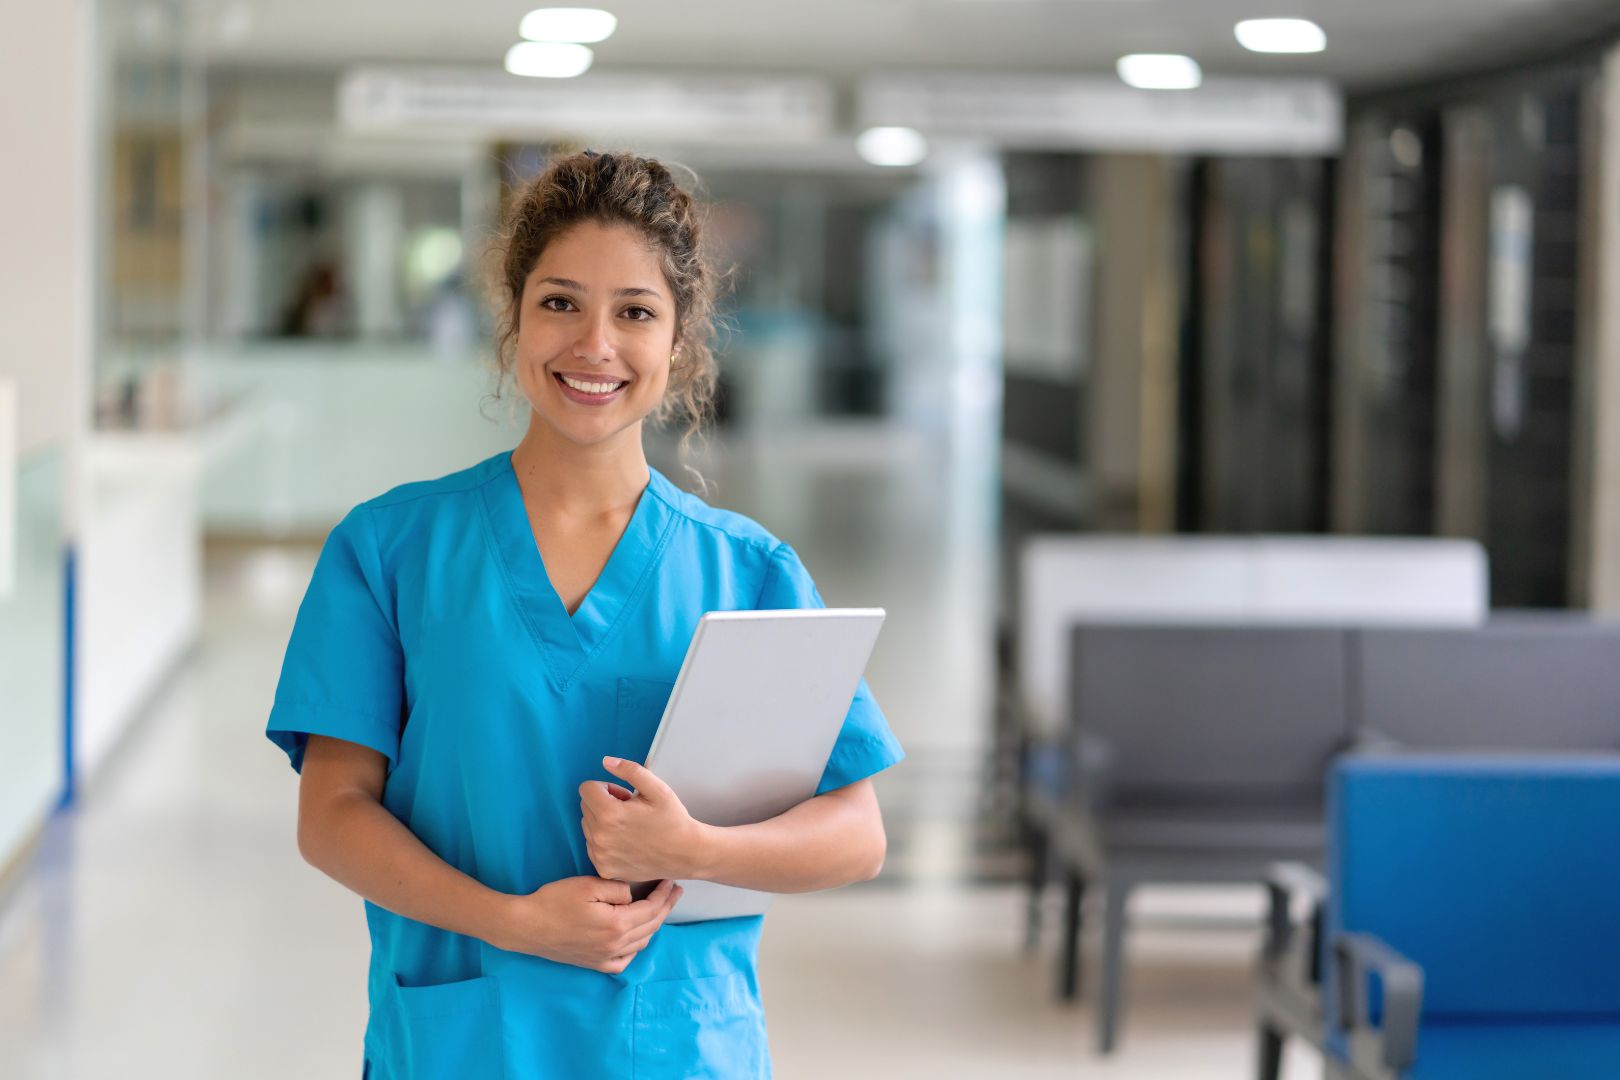 What Does a New Nurse Need?